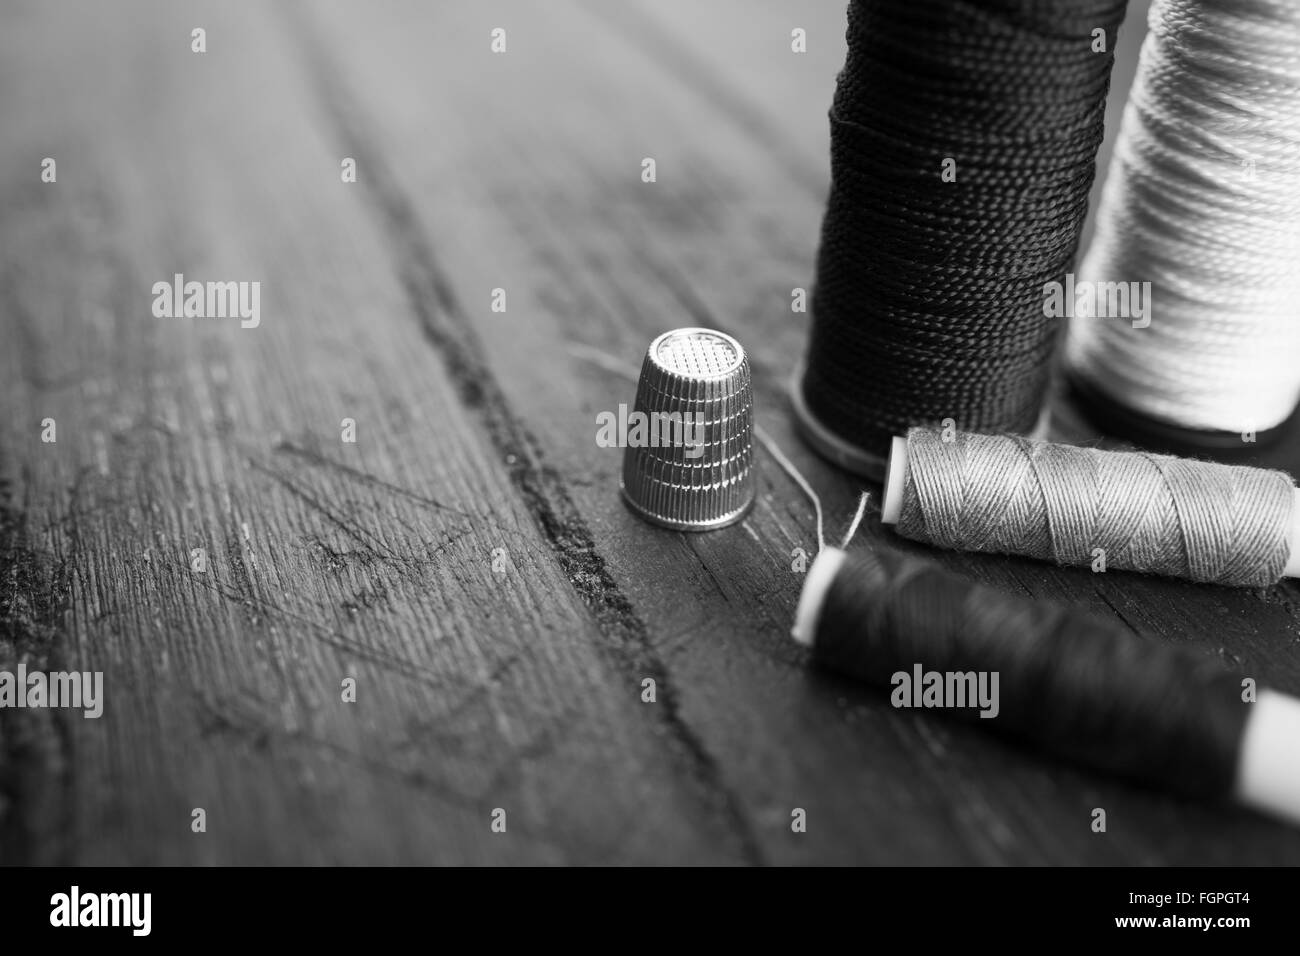 Sewing accessories: bobbins of thread, needle, thimble on wooden table. Black and white photo. Tailoring and sewing concept. Stock Photo